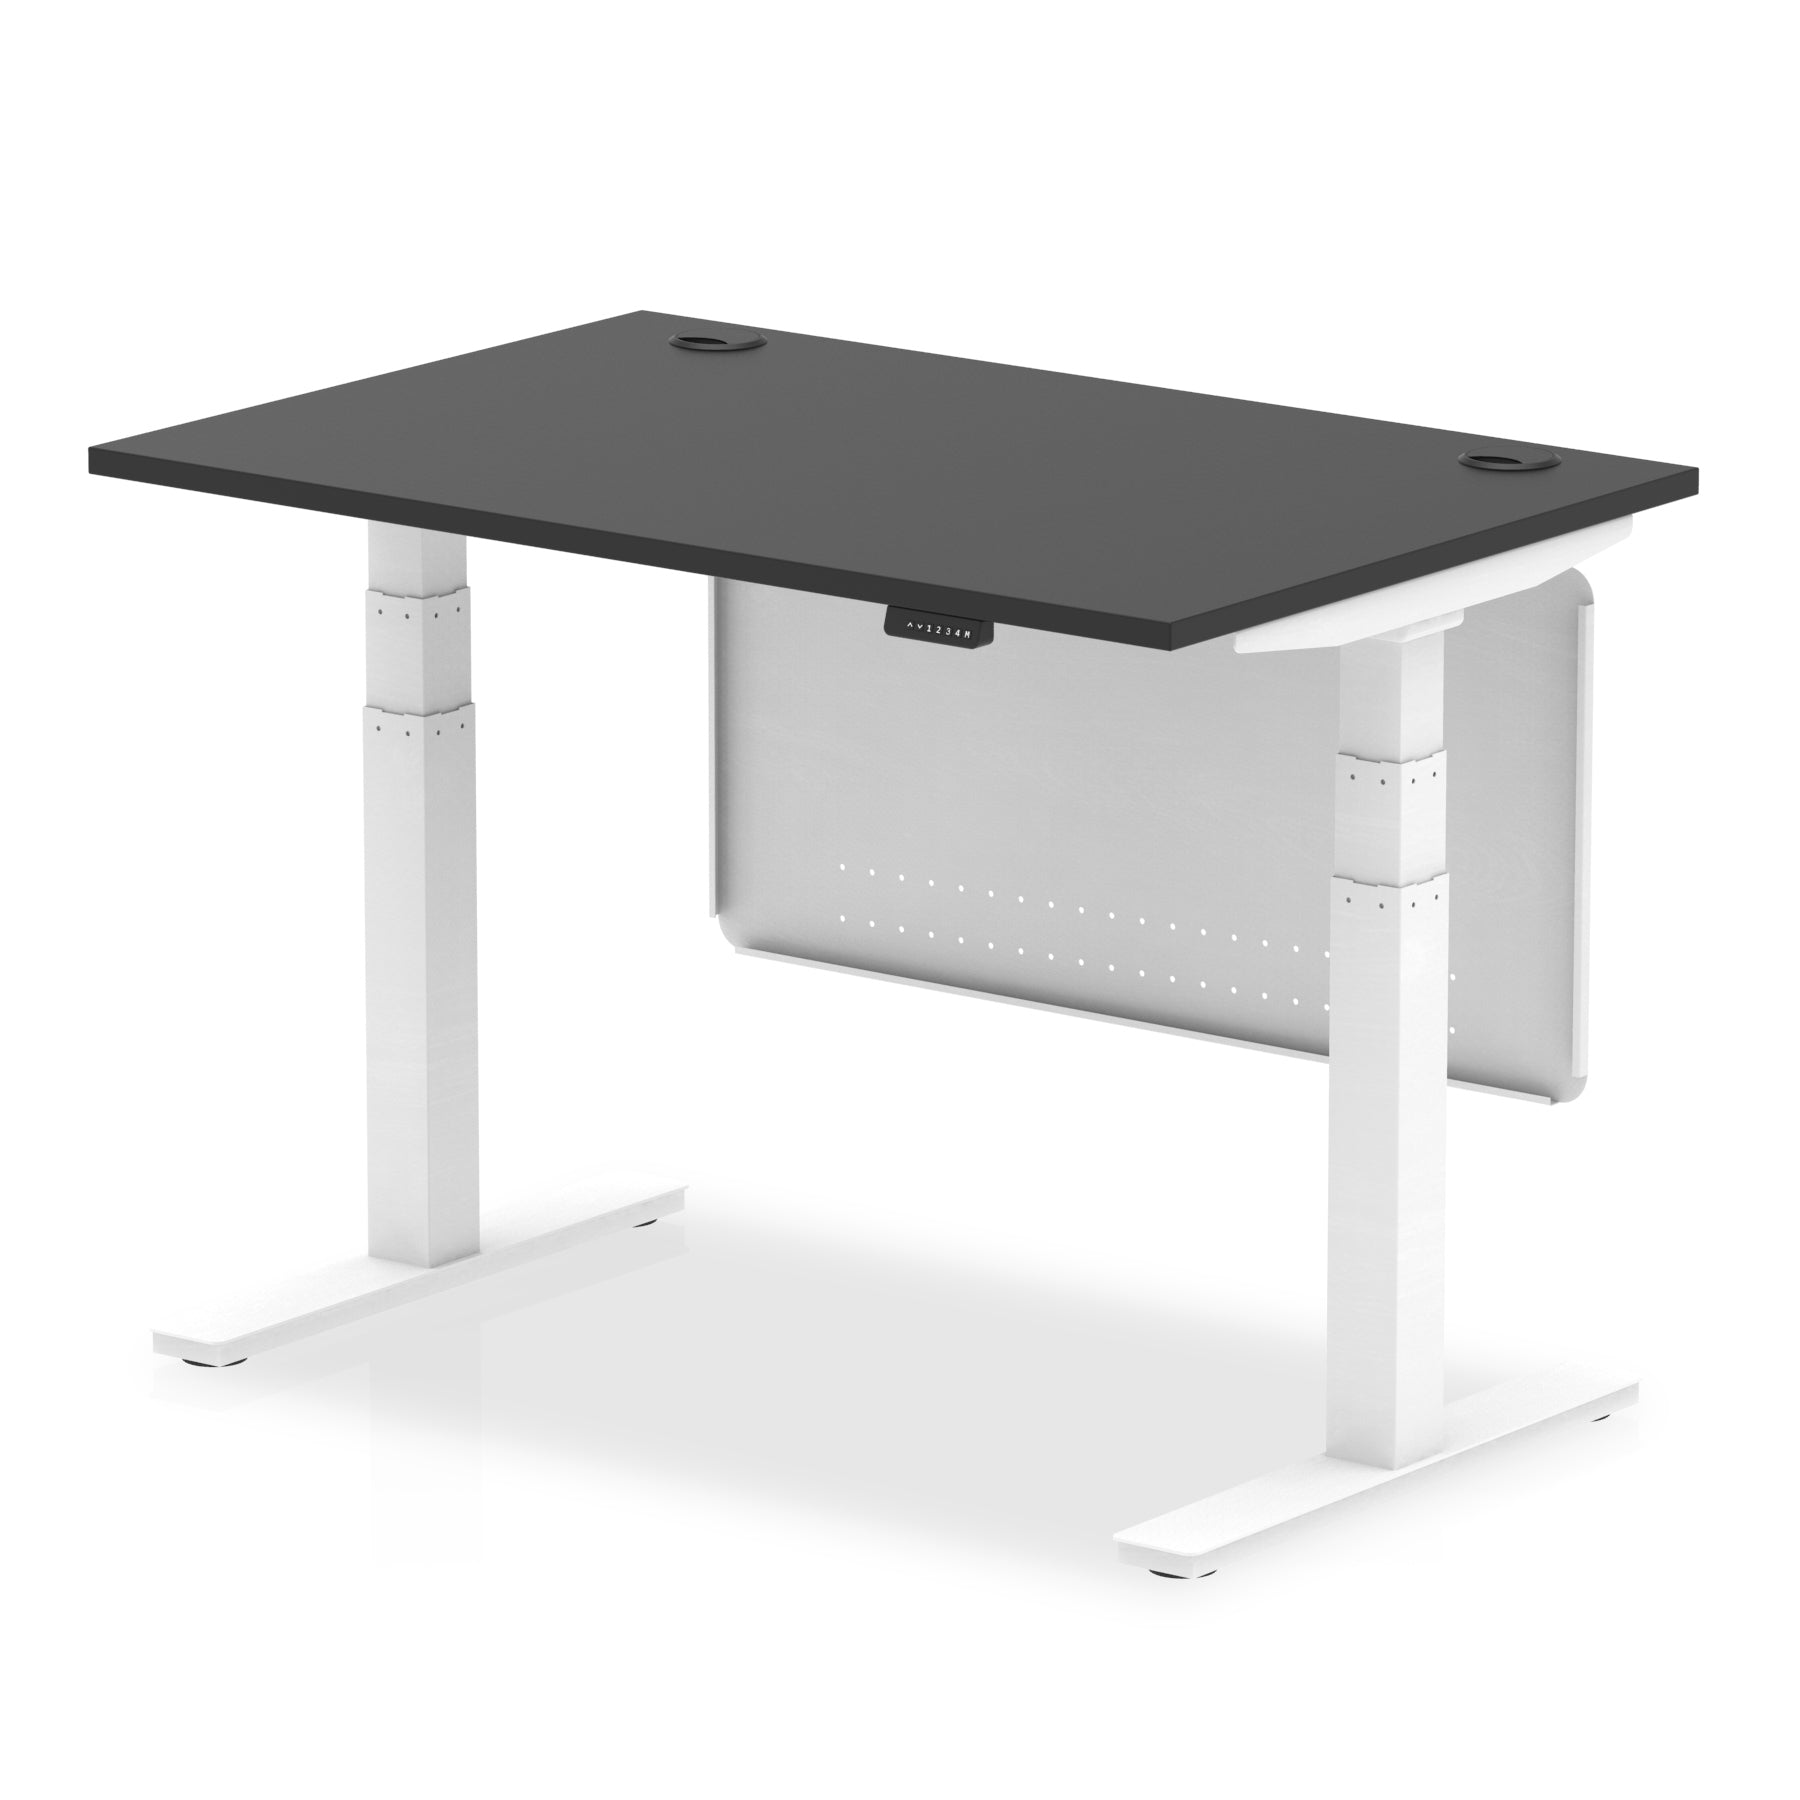 Air Height Adjustable Black Series Desk with Cable Ports with Steel Modesty Panel